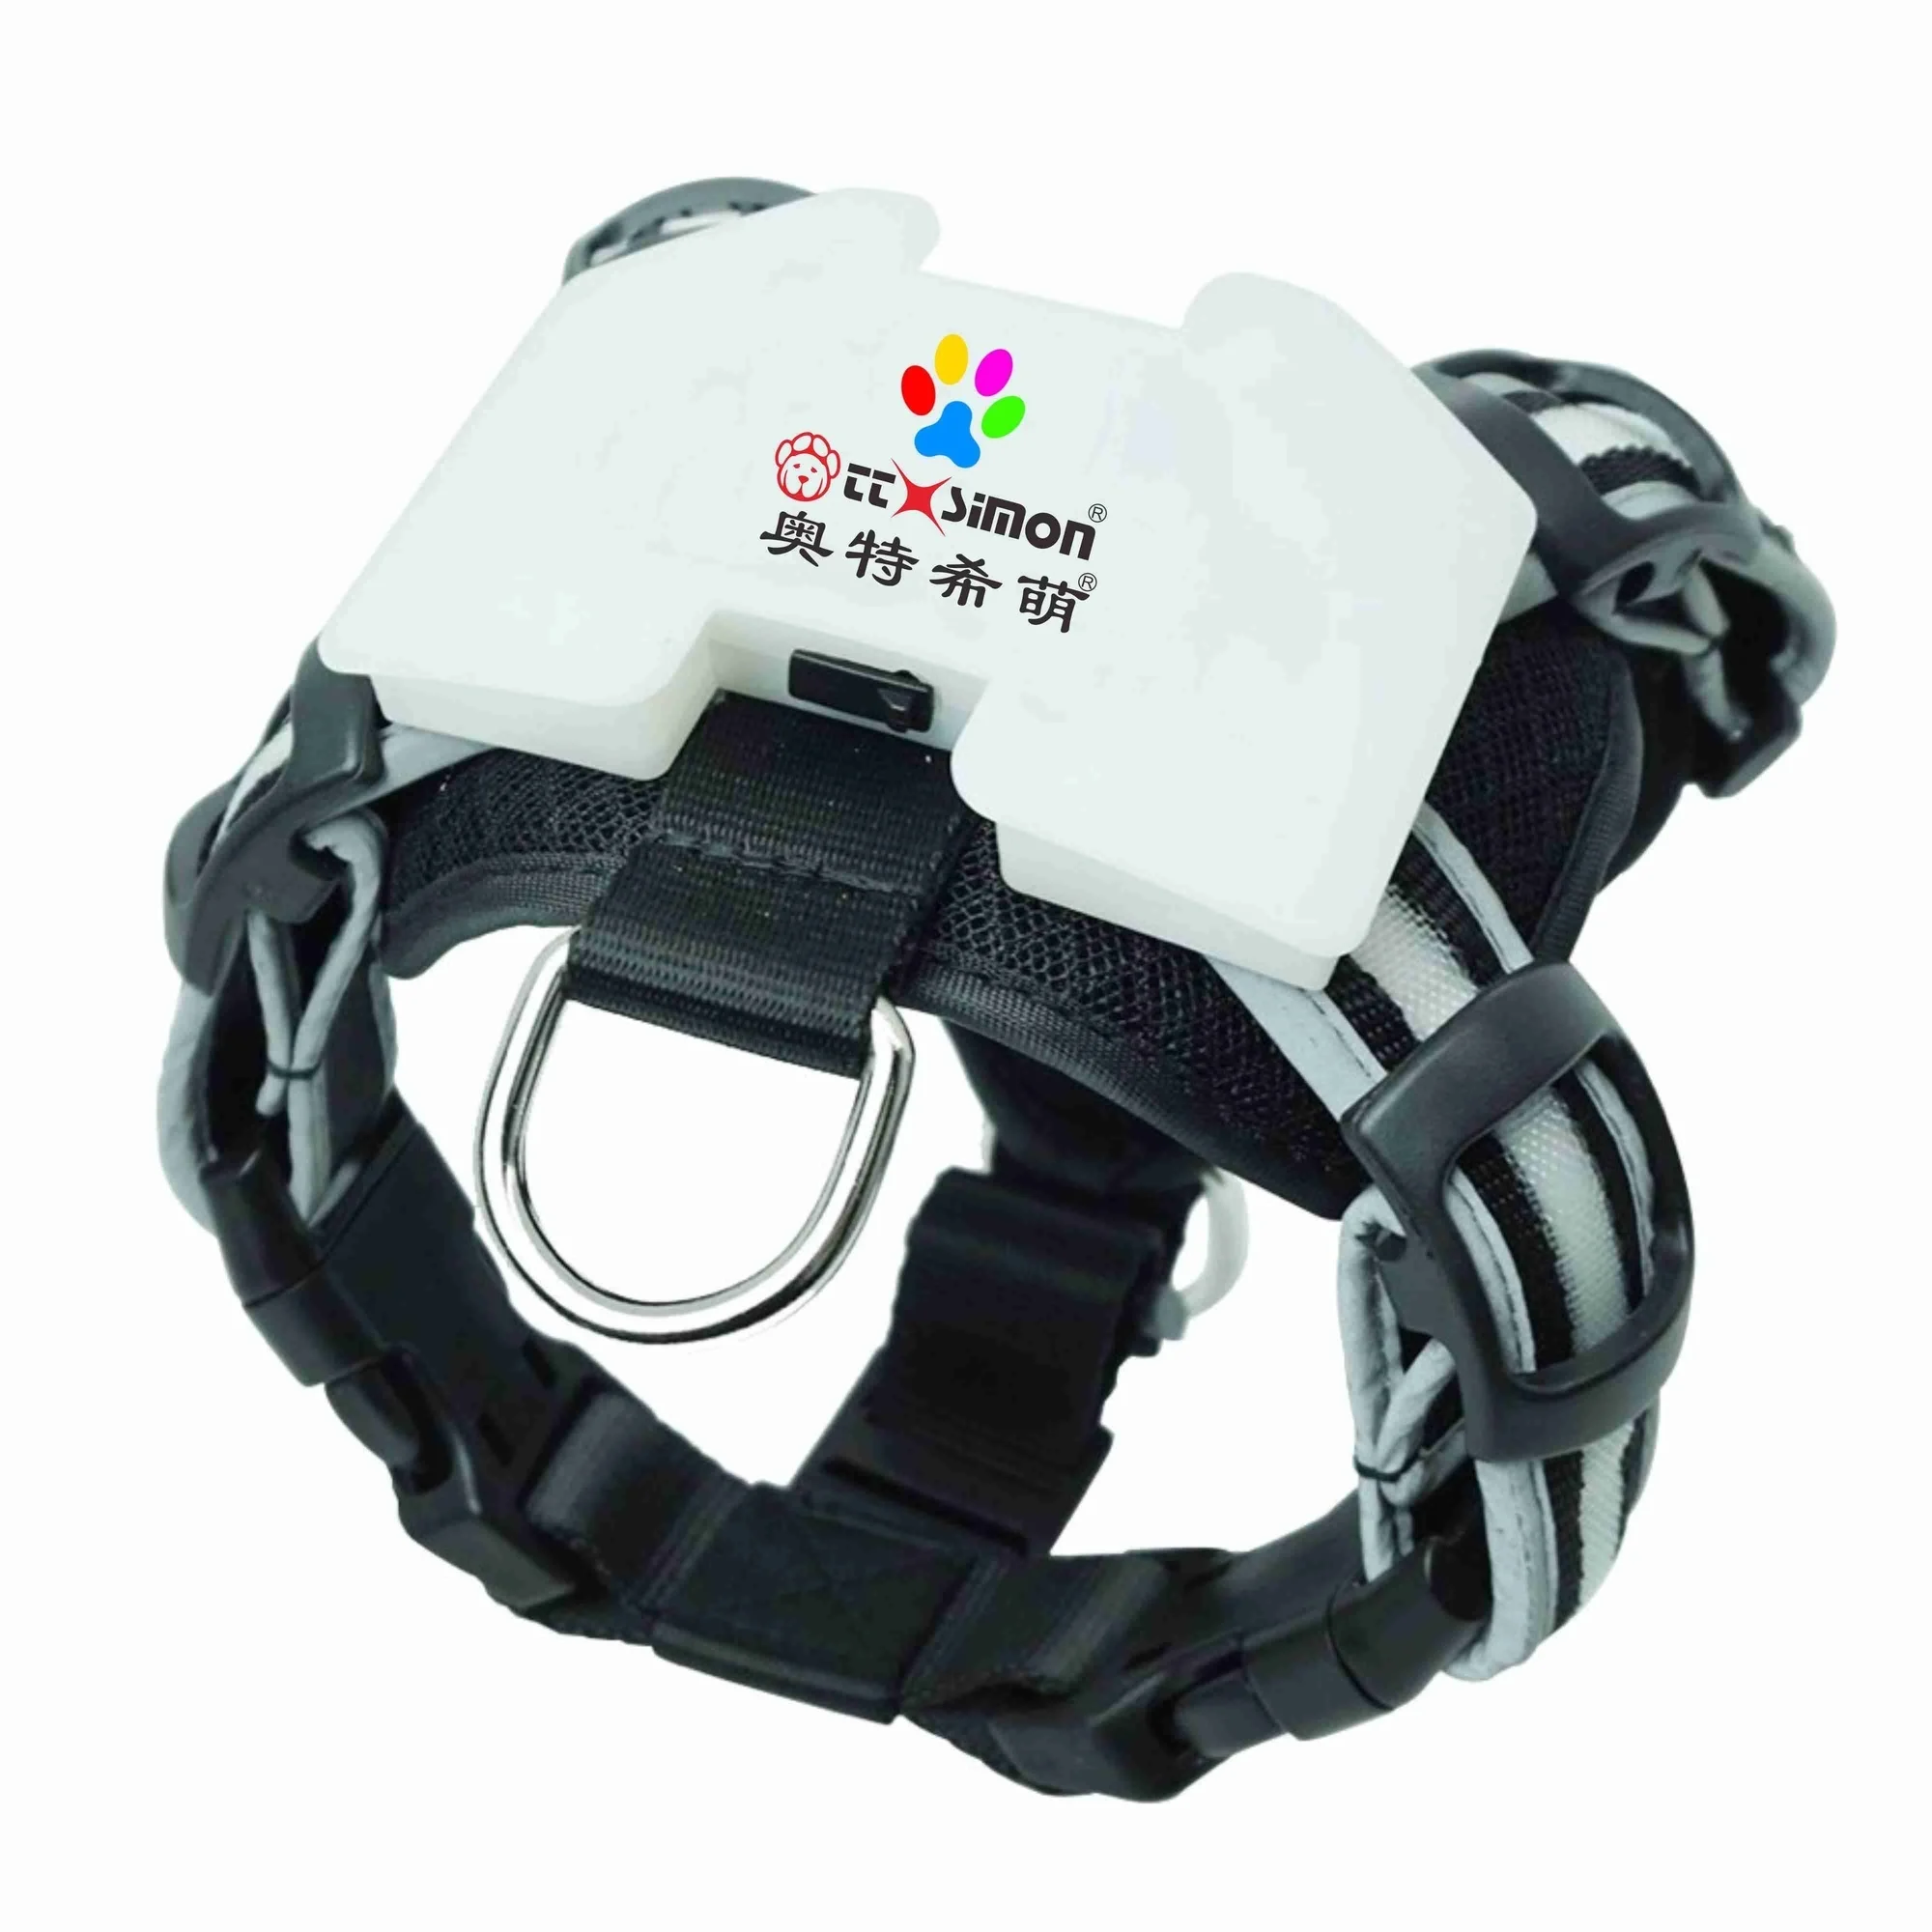 

pets accesories simon cc rechargeable led dog harness for Large Dog trade assurance